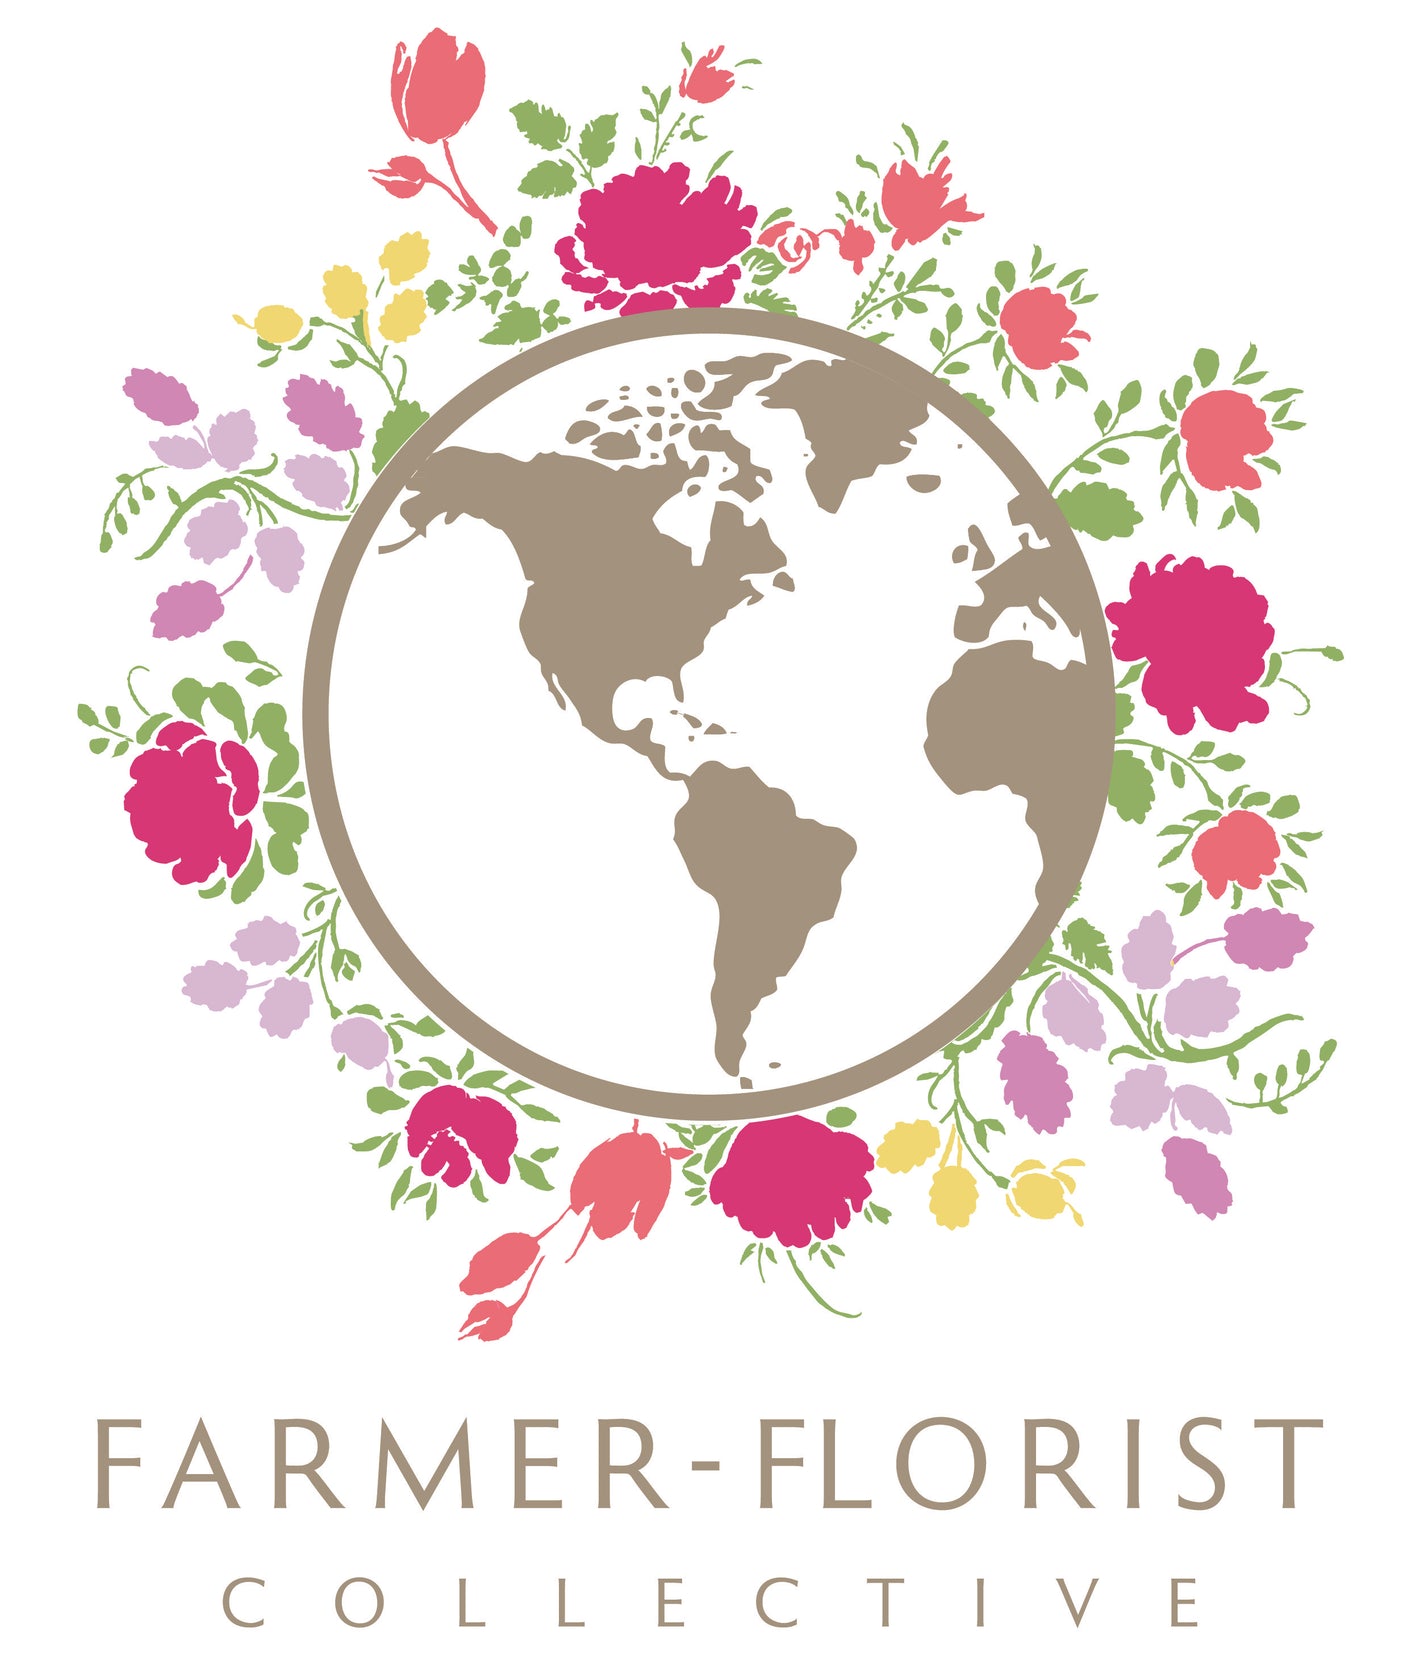 Hickory View Farms is a member of the Farmer Florist Collective sponsored by Floret Flowers.  This is an interactive search tool to find locally grown flowers and florists who use locally grown flowers.